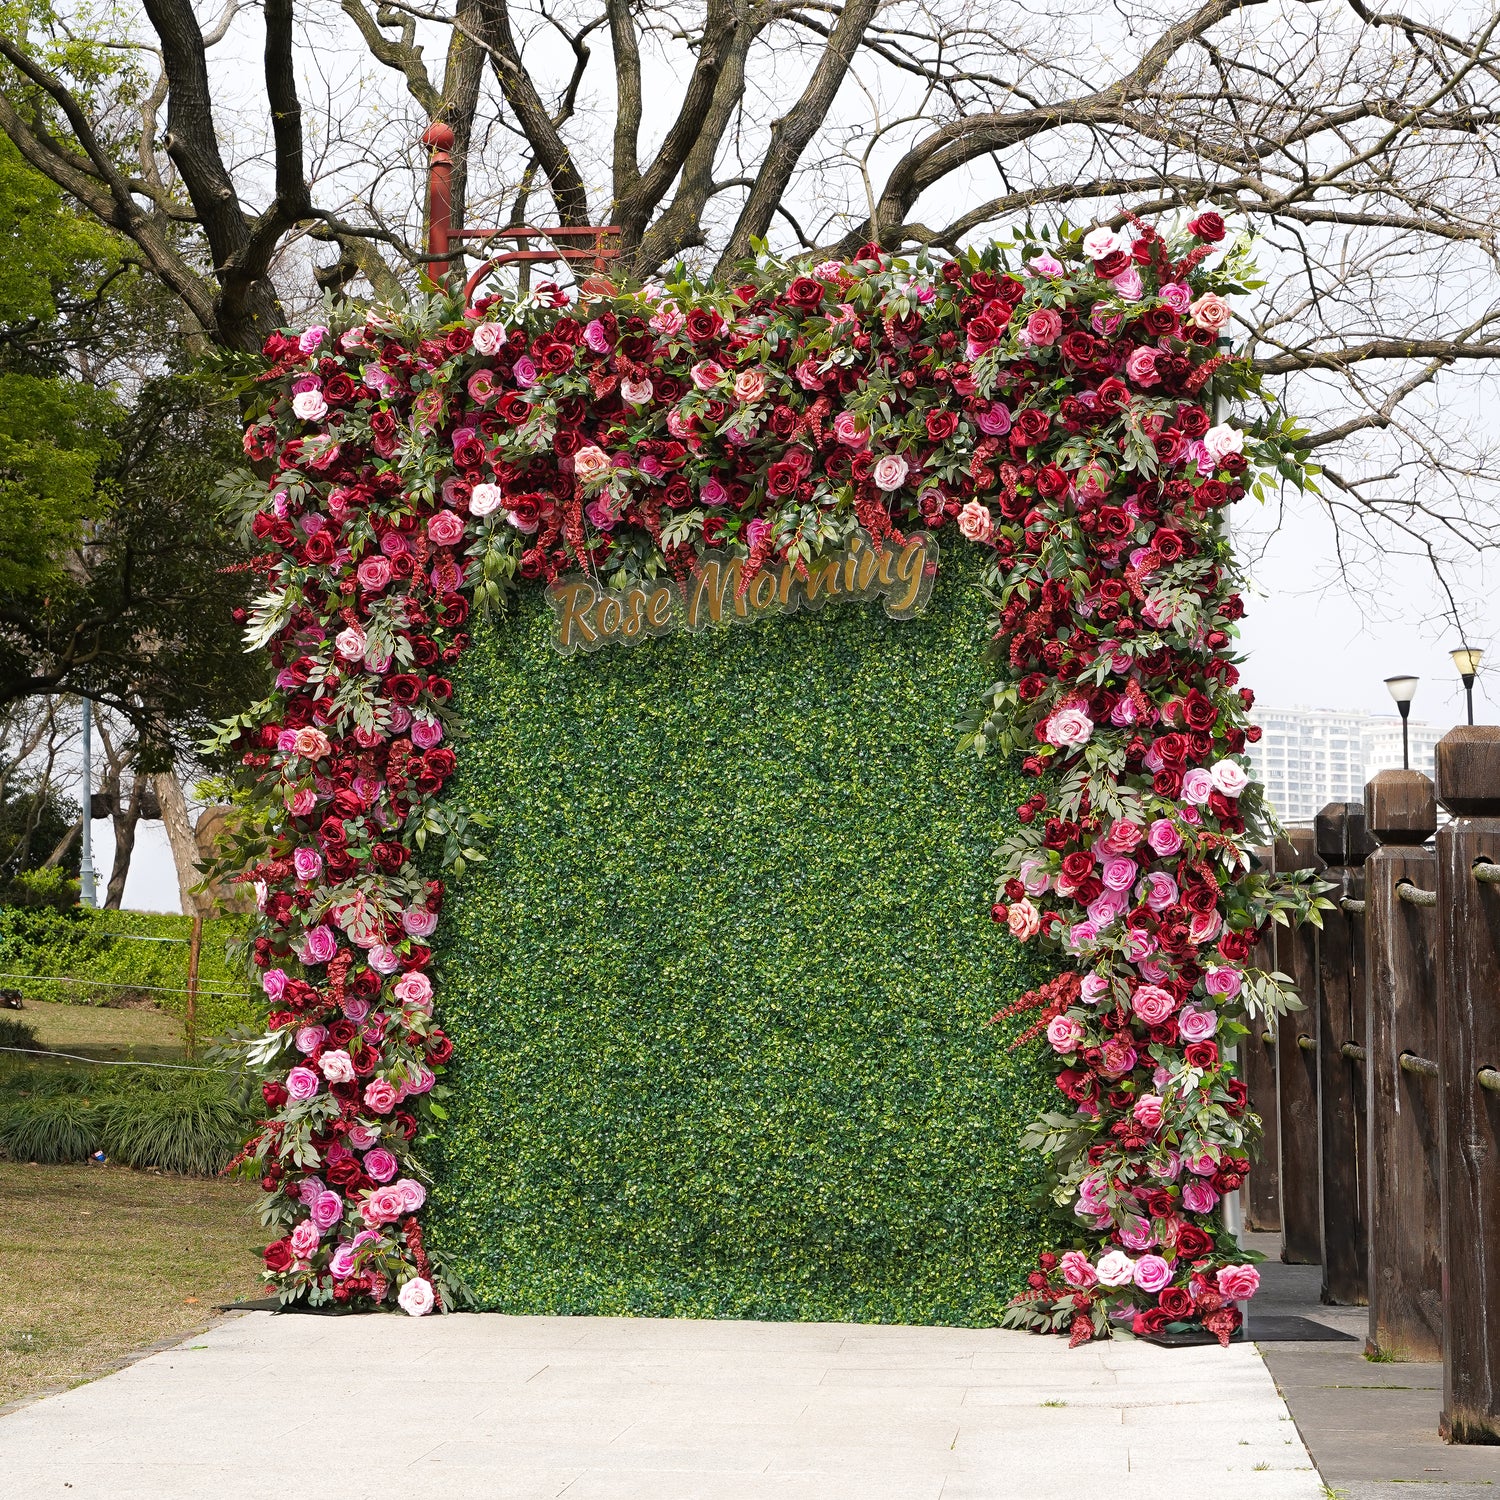 Rose Morning“The flower walls are made of artificial flowers in various colors, layered at different levels to create a lush, elegant and natural look. The exclusive zipper design and roll-up design make it easy to install and remove.”